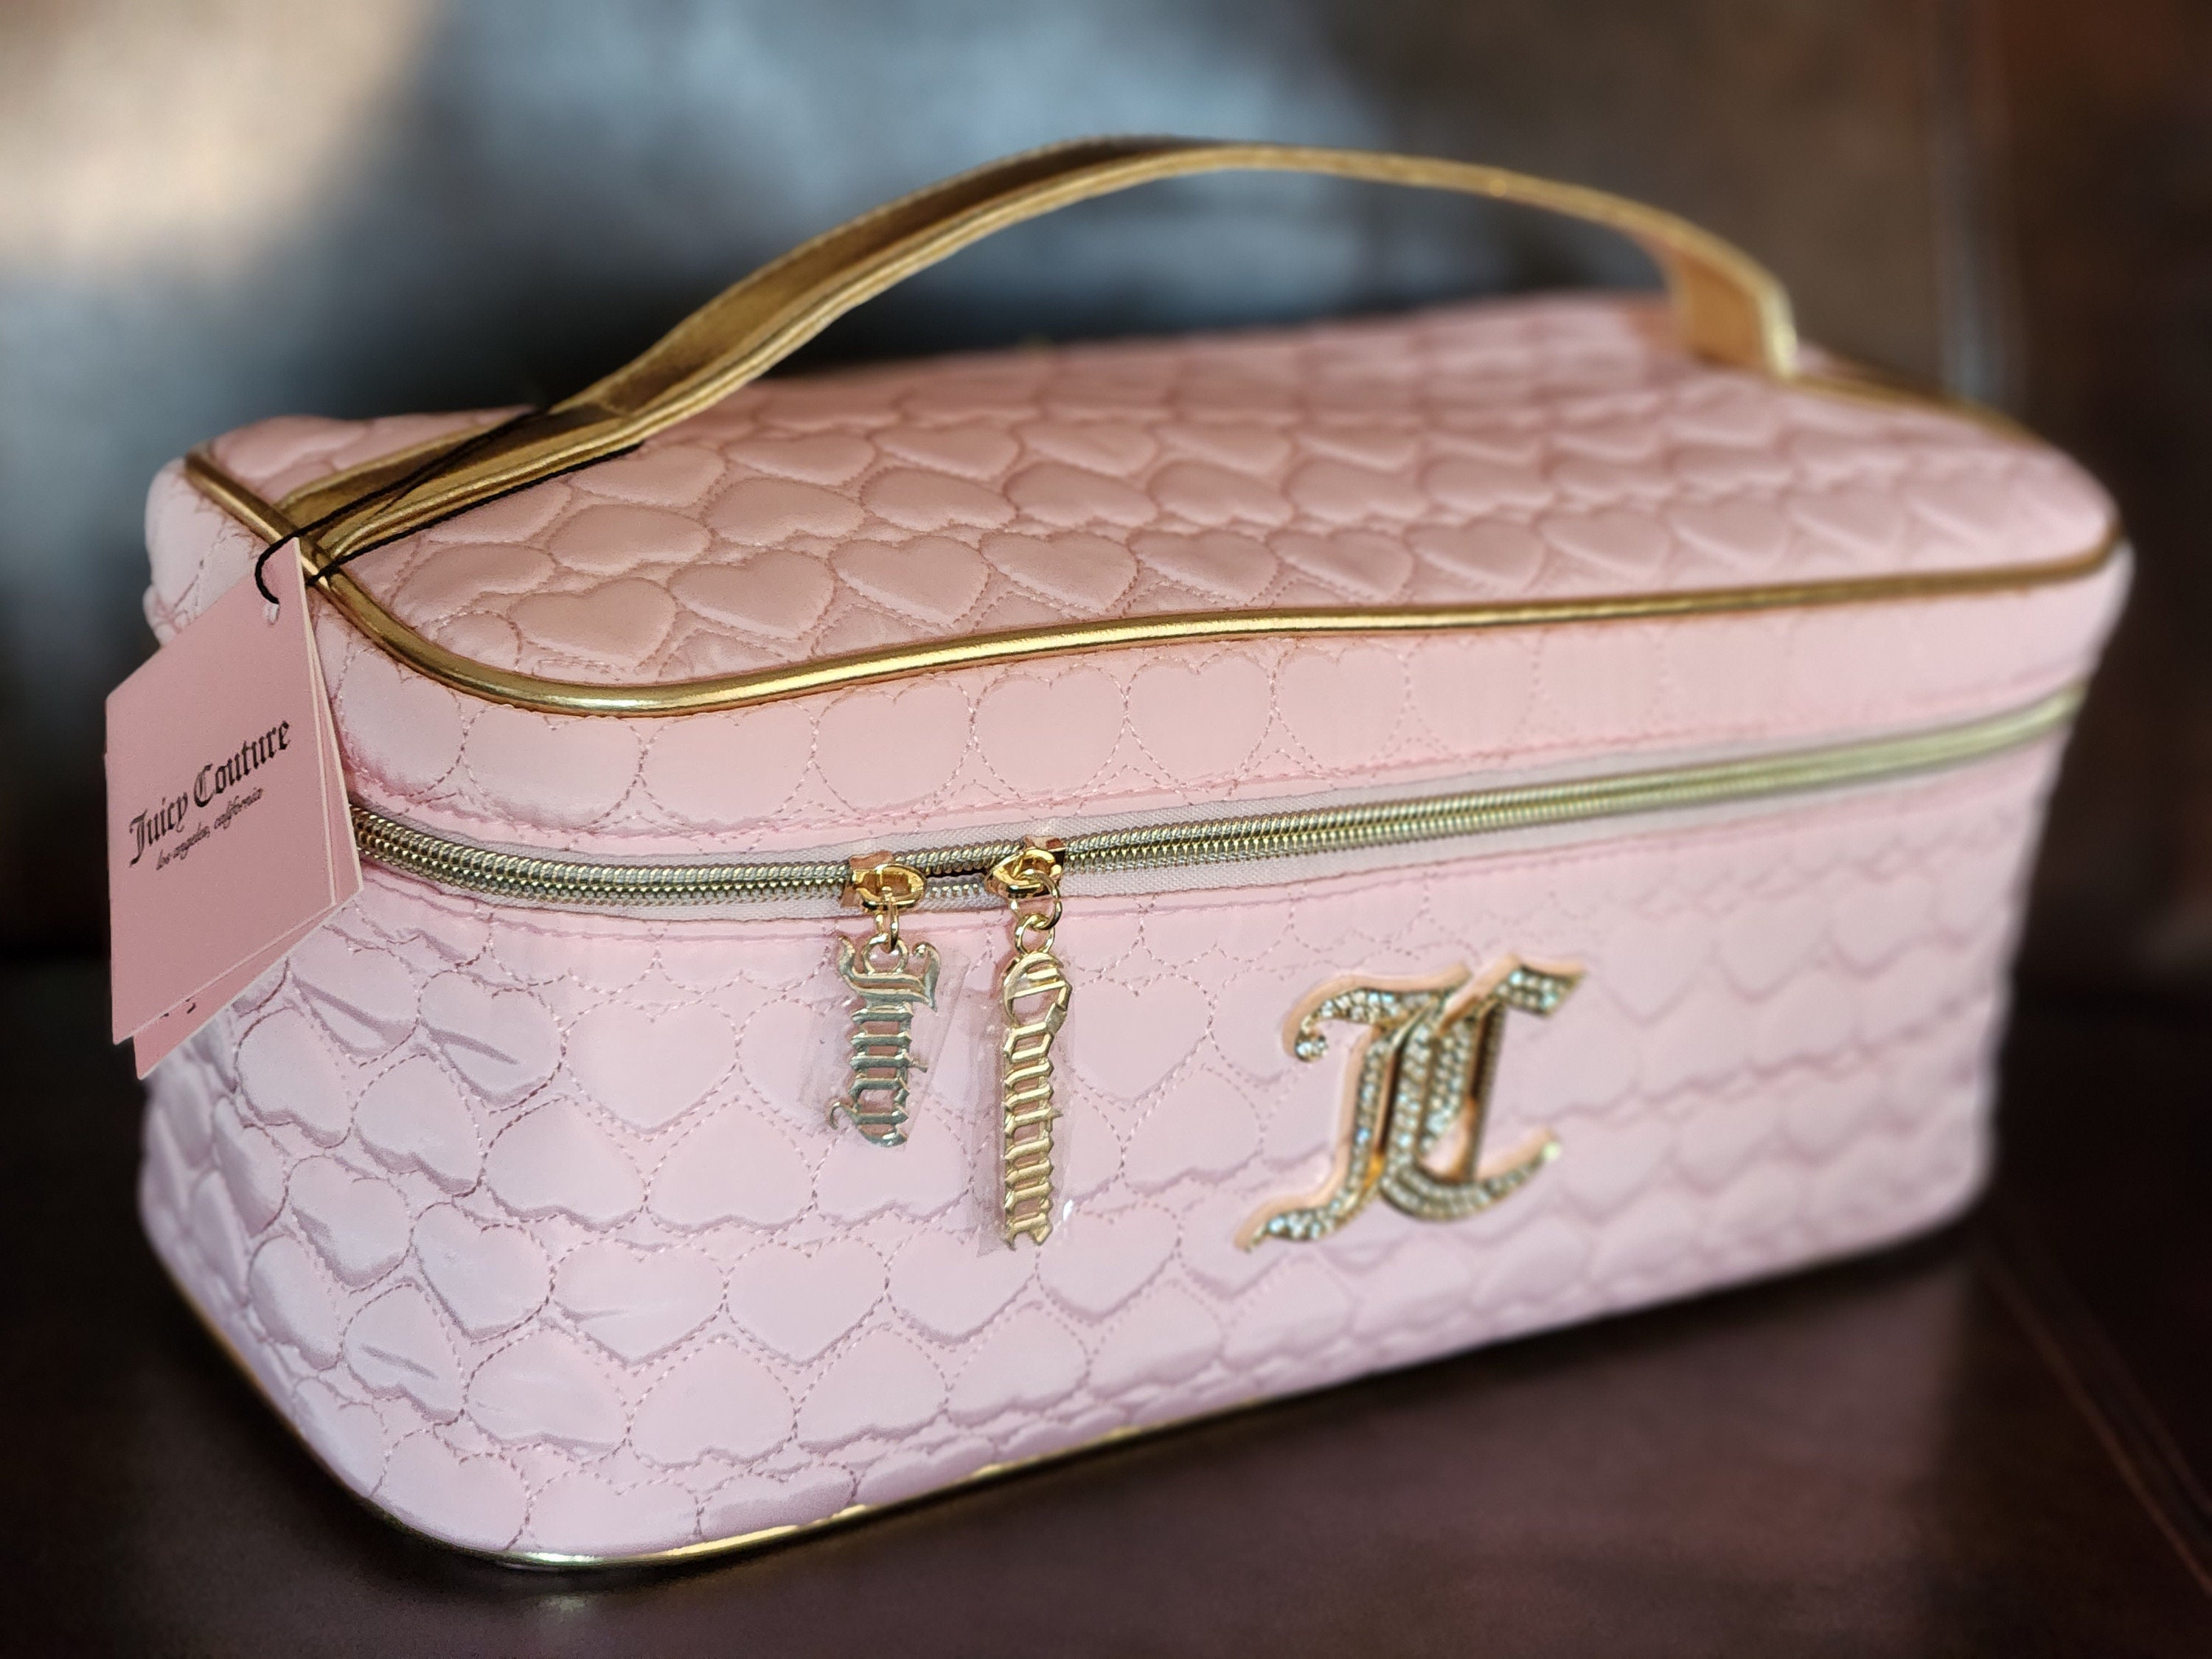 WHAT'S IN MY BAG: Juicy Couture Quilty Pleasure Backpack PINK